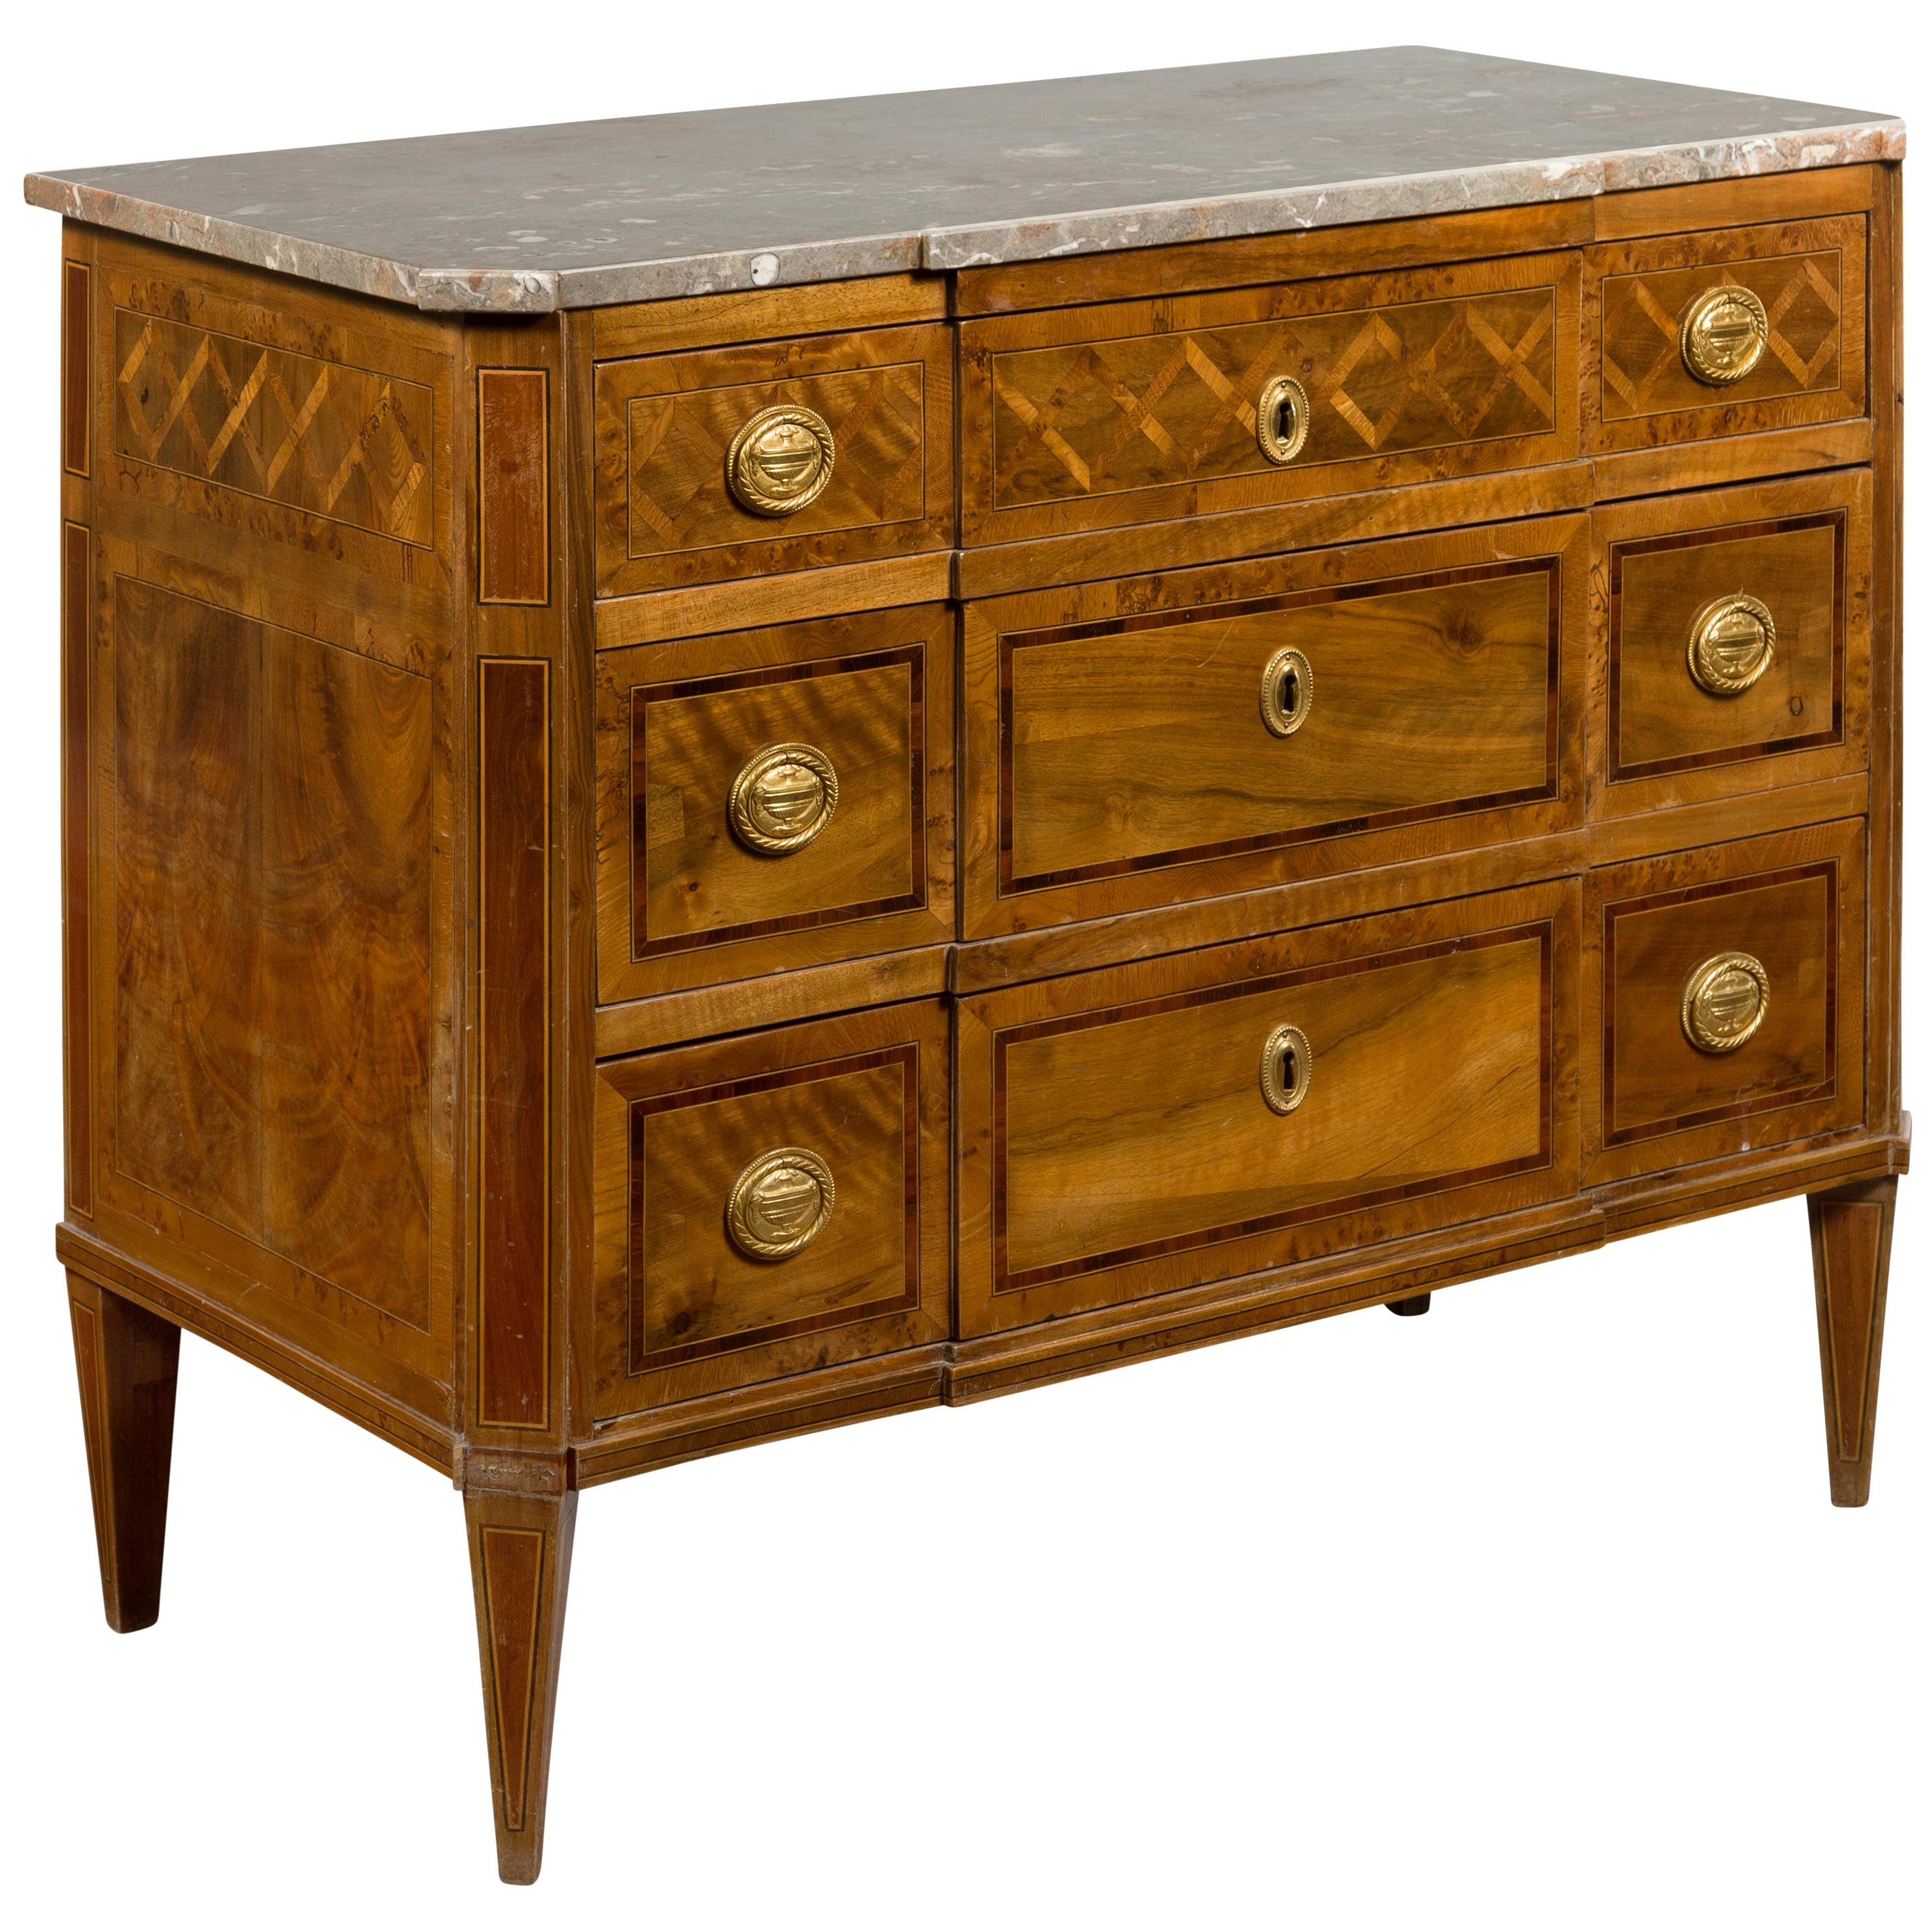 Italian 1820s Neoclassical Walnut Commode with Marble Top and Marquetry Decor